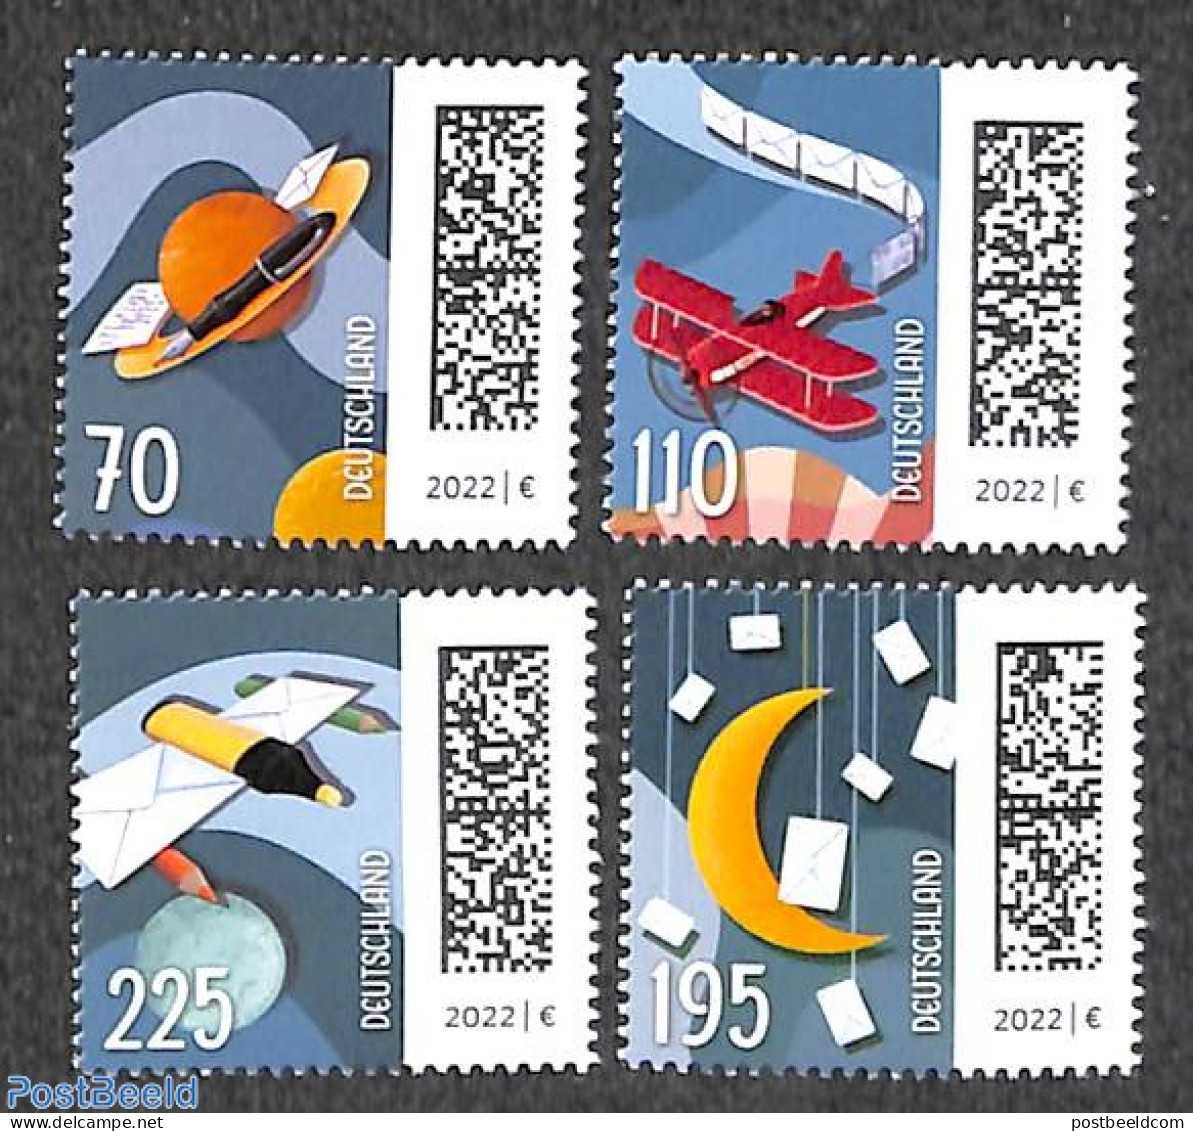 Germany, Federal Republic 2022 Definitives 4v, Mint NH, Transport - Post - Aircraft & Aviation - Unused Stamps